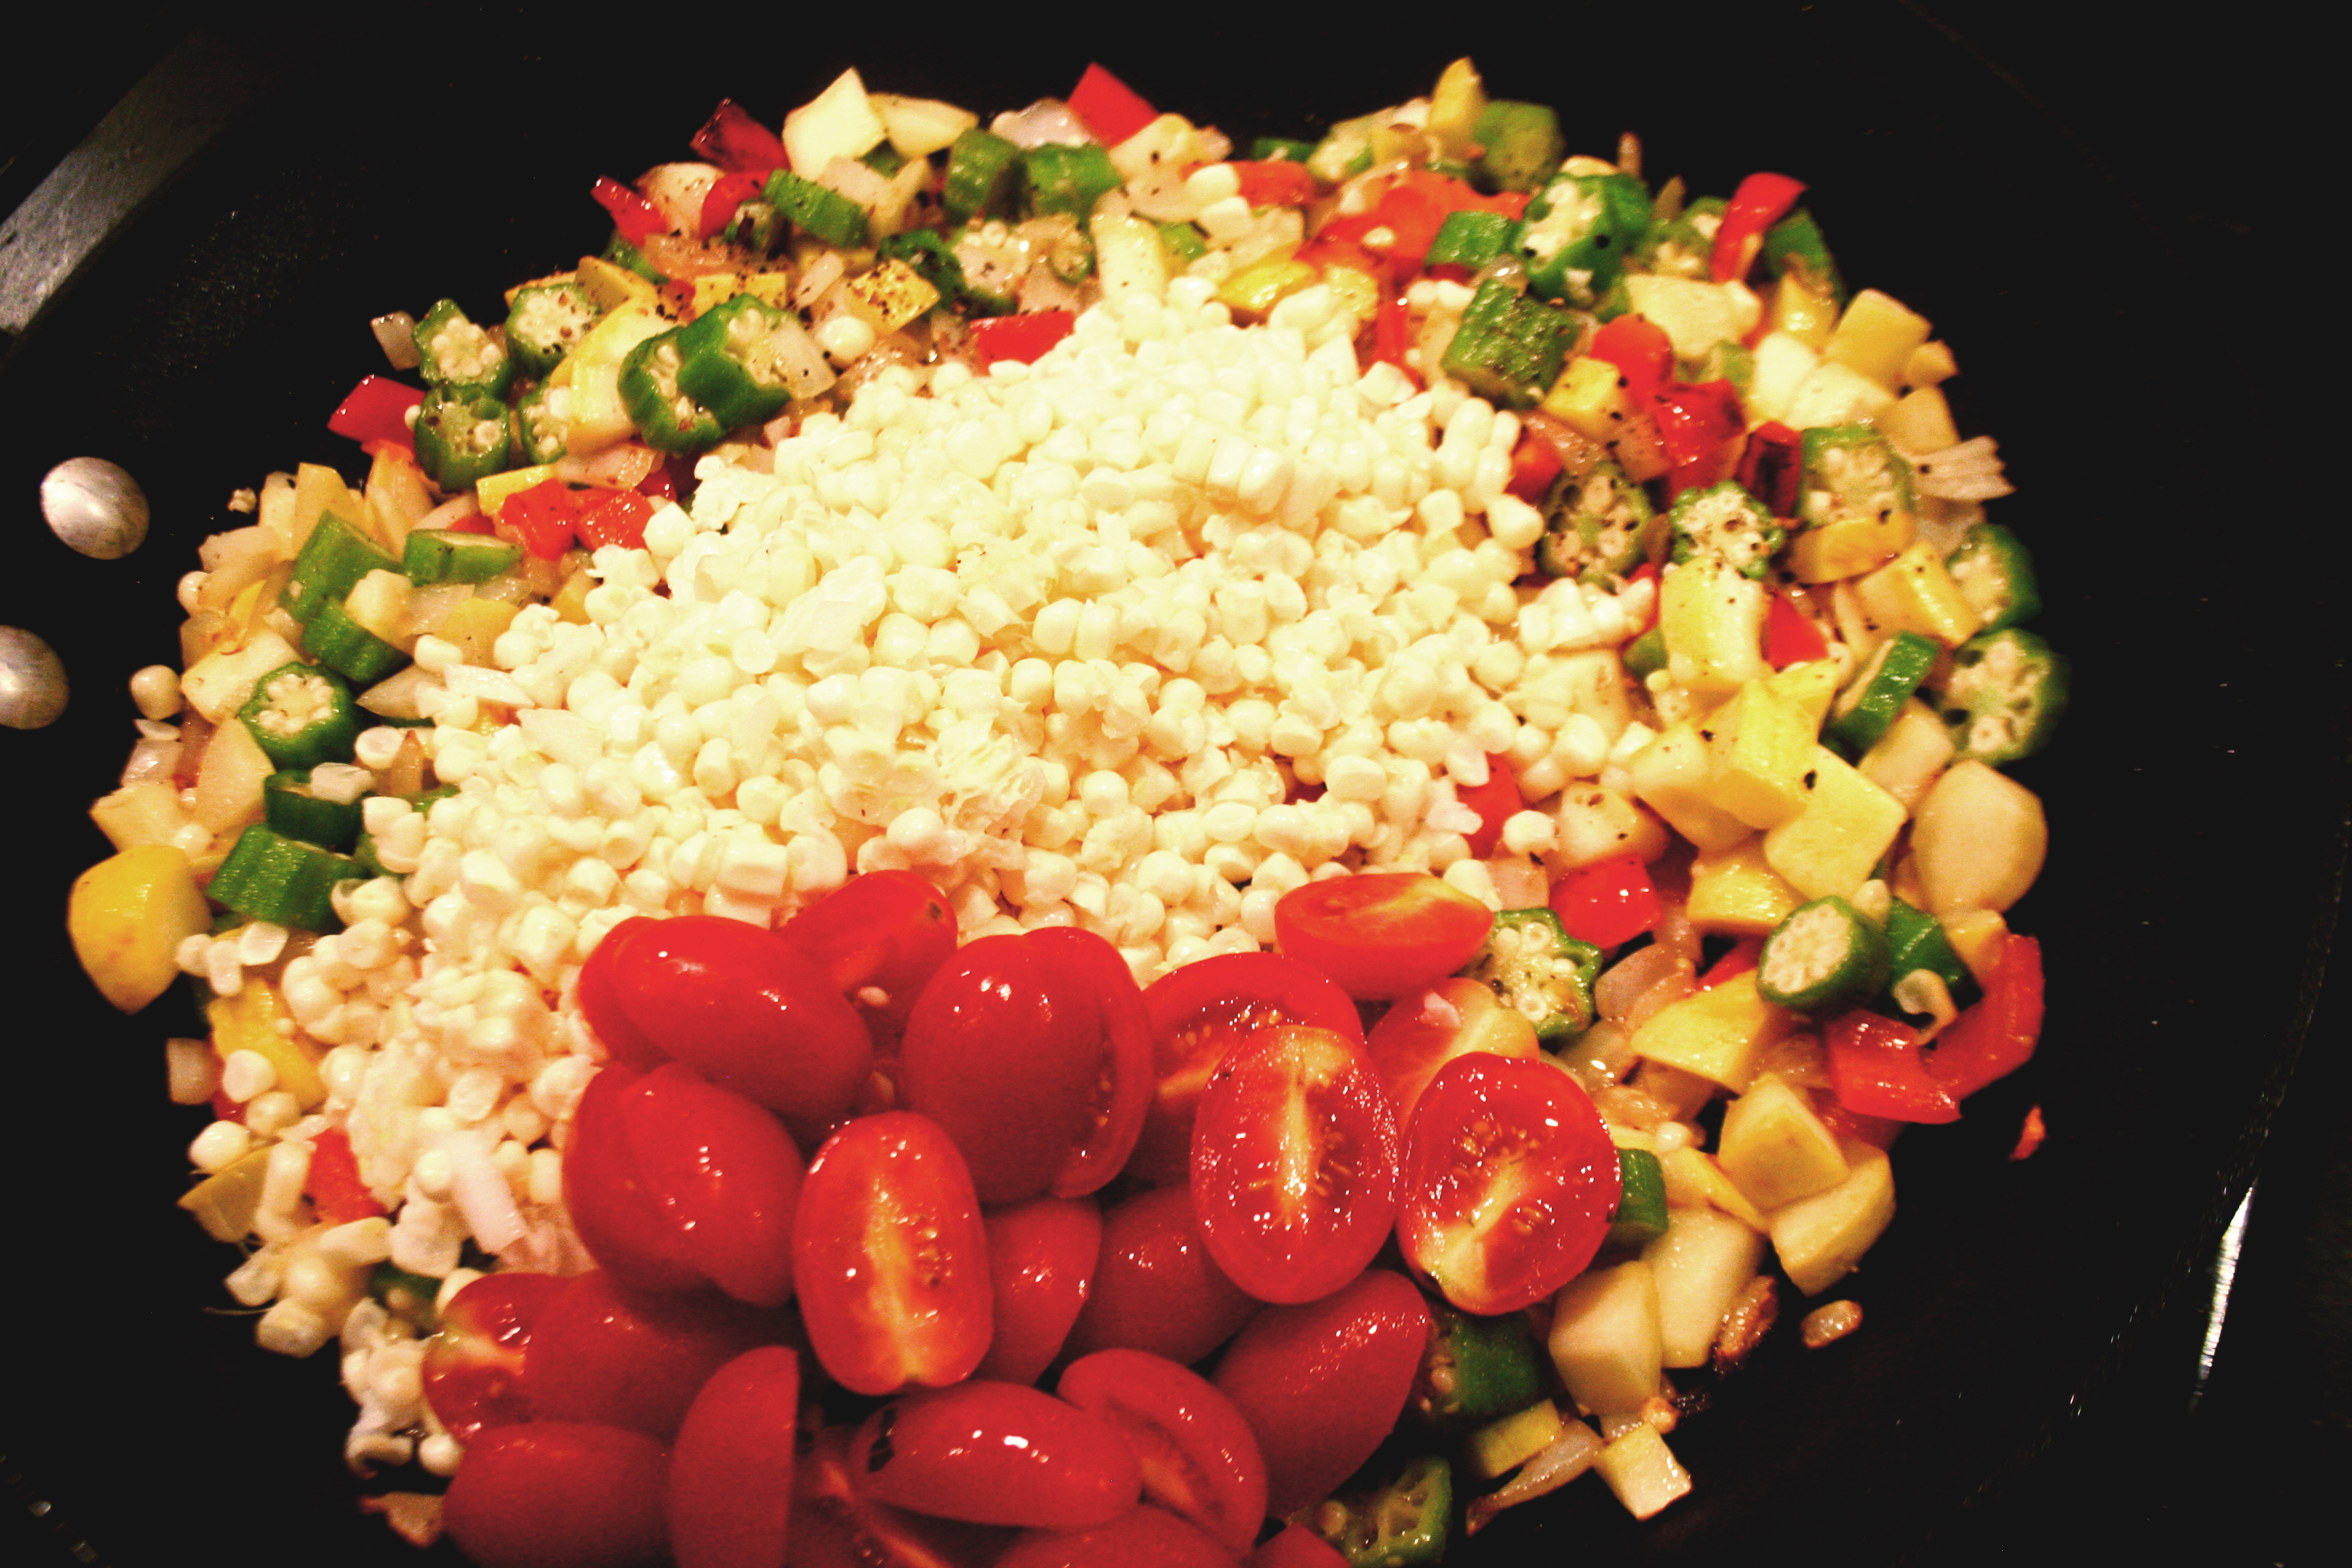 Sauteing the summer vegetables for succotash